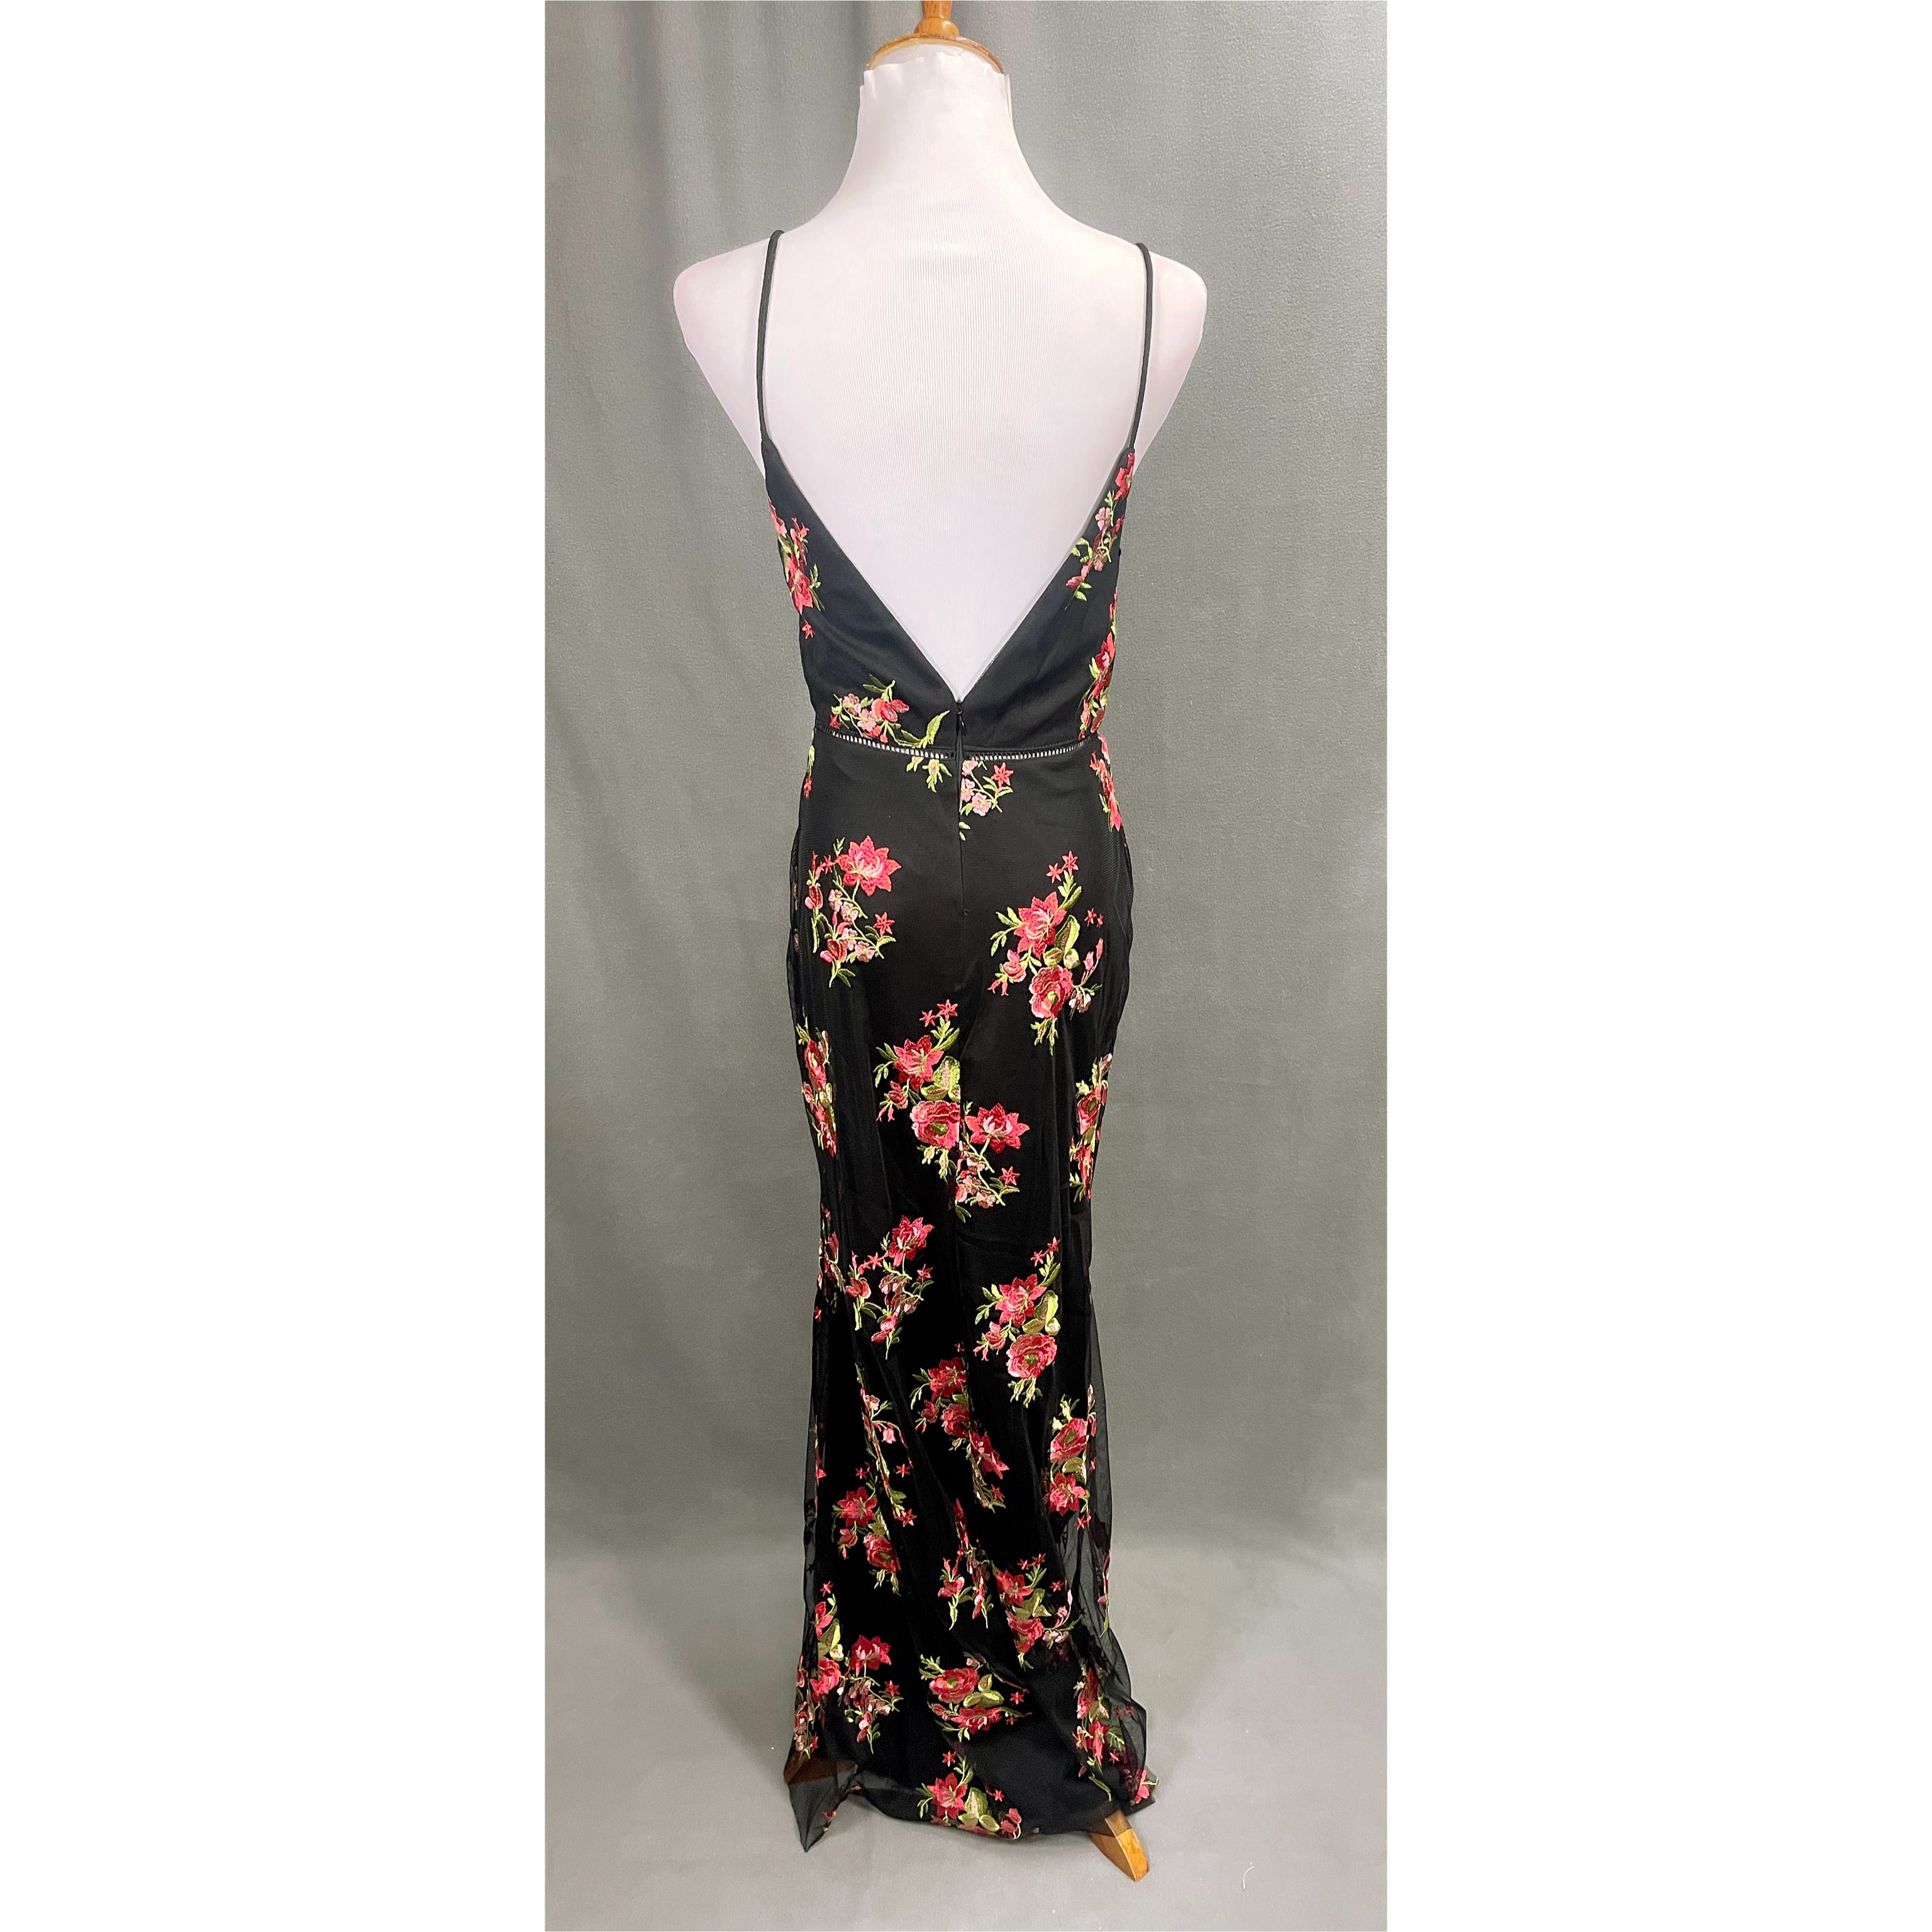 Gianni Bini black floral dress, size S, NEW WITH TAGS!